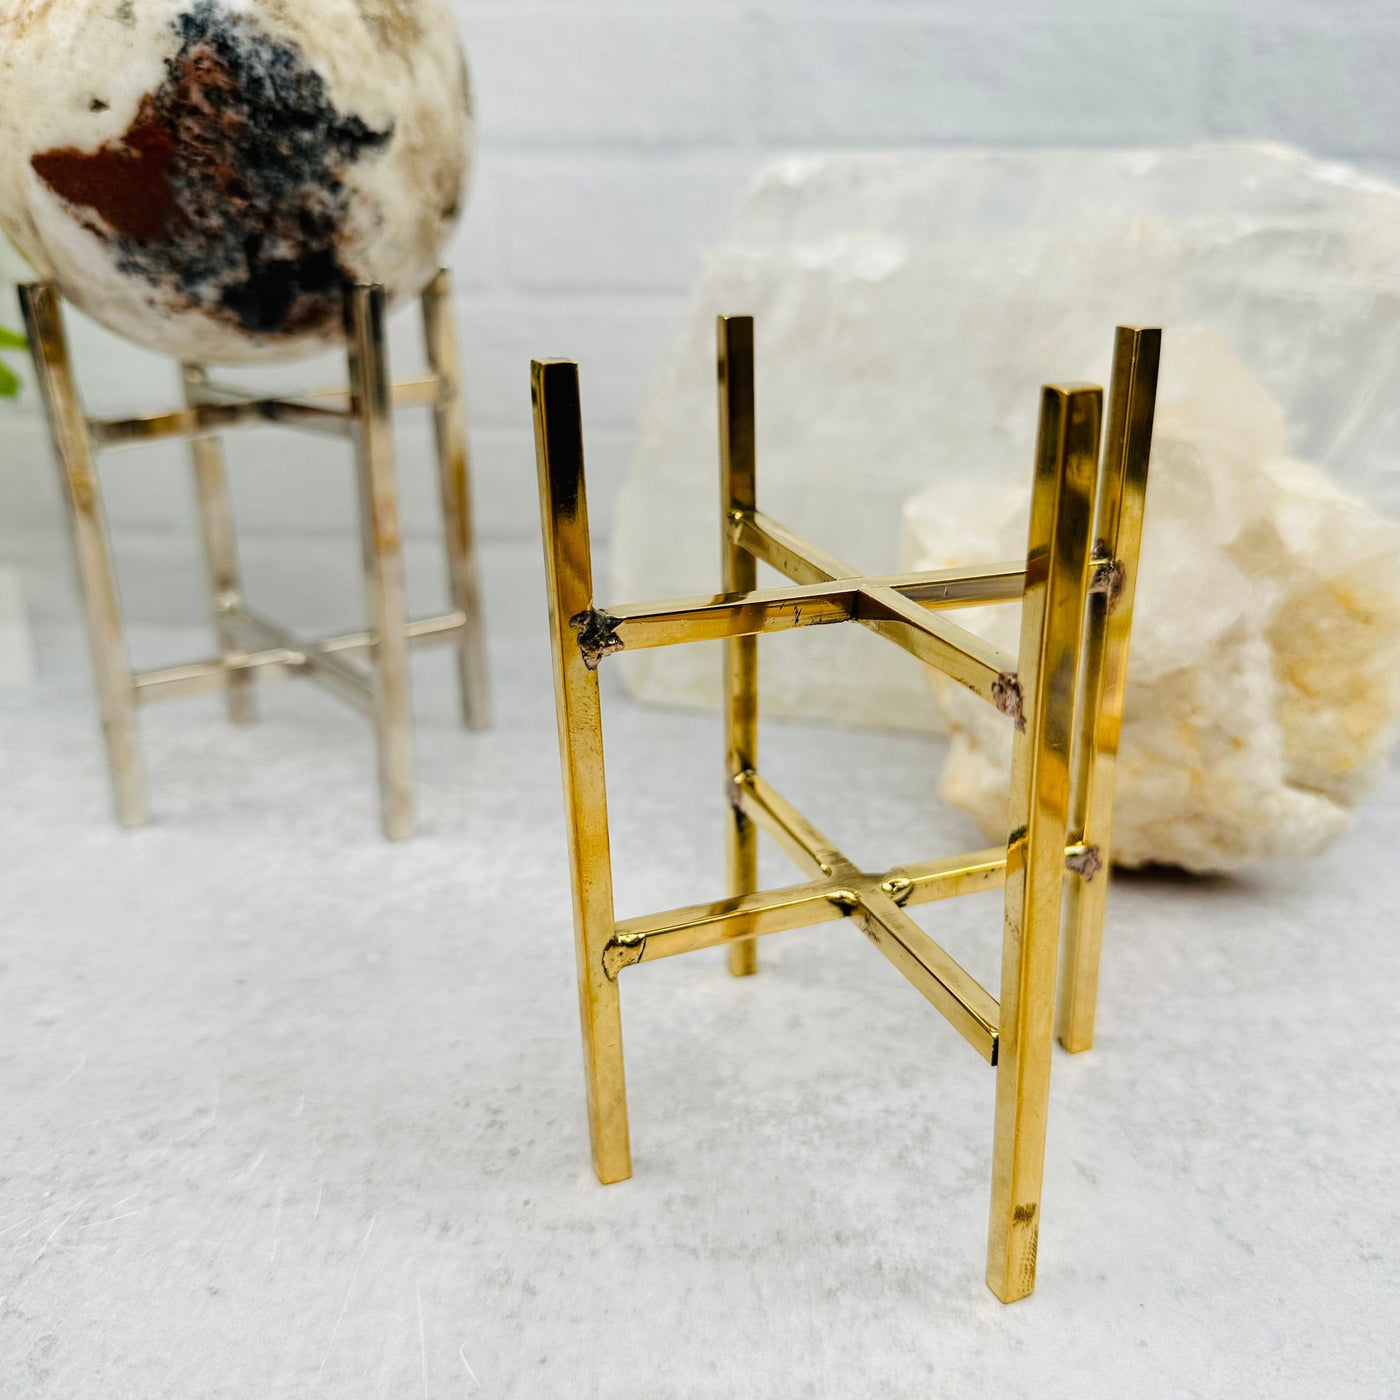 Crystal Sphere Stand - 4 Legged - Choose Gold Brass or Silver Aluminum